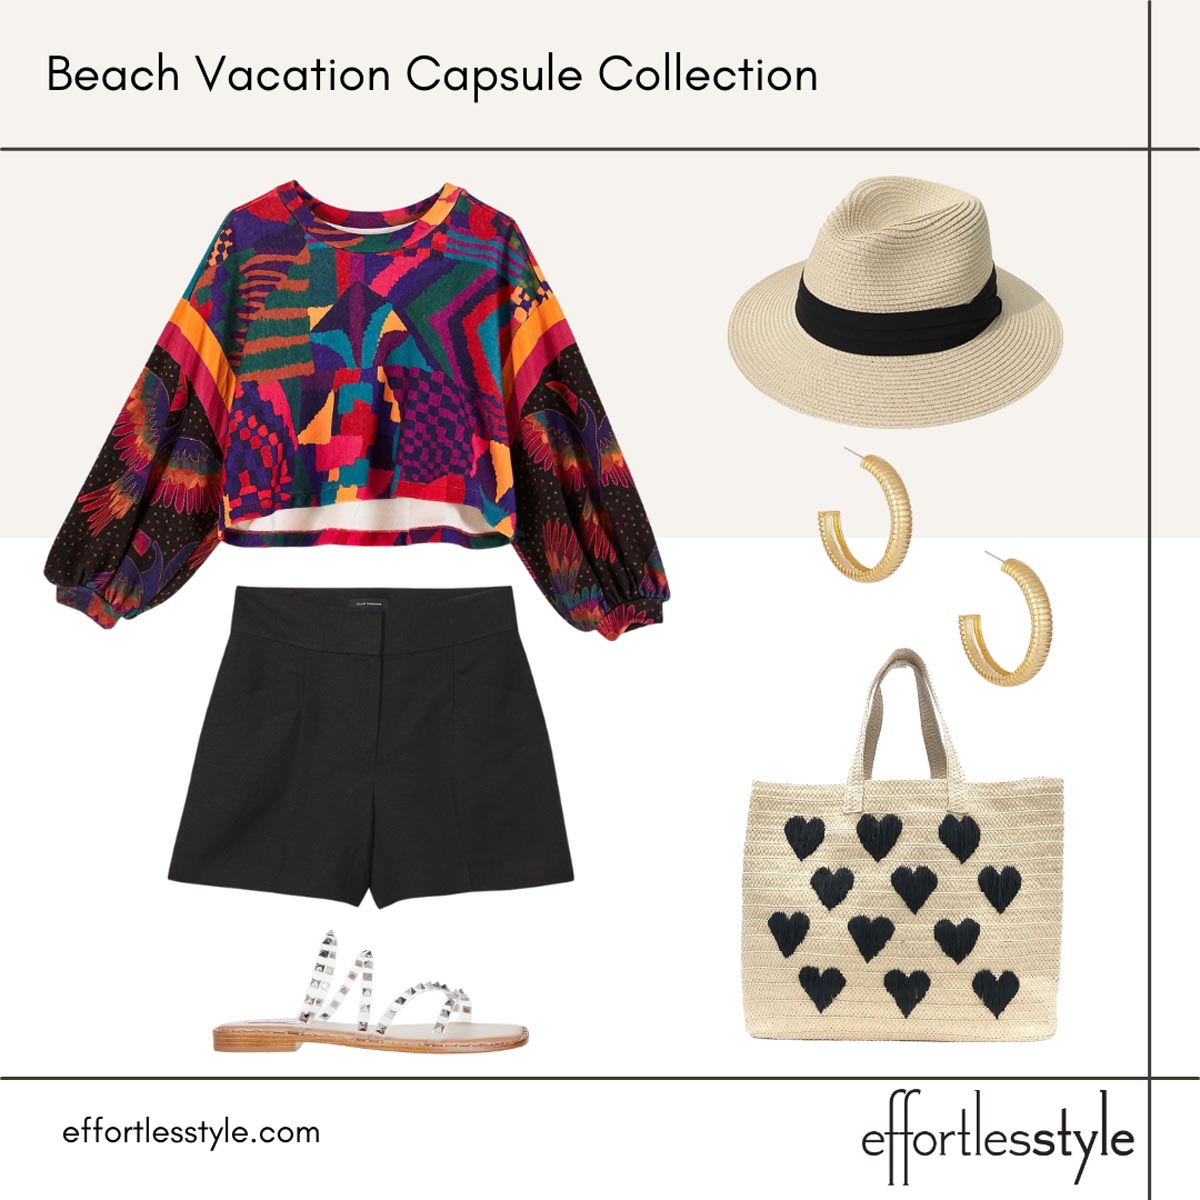 Beach vacation capsule styled looks patterned sweatshirt printed sweatshirt how to wear a sweatshirt with shorts styling shorts for spring fun beach looks